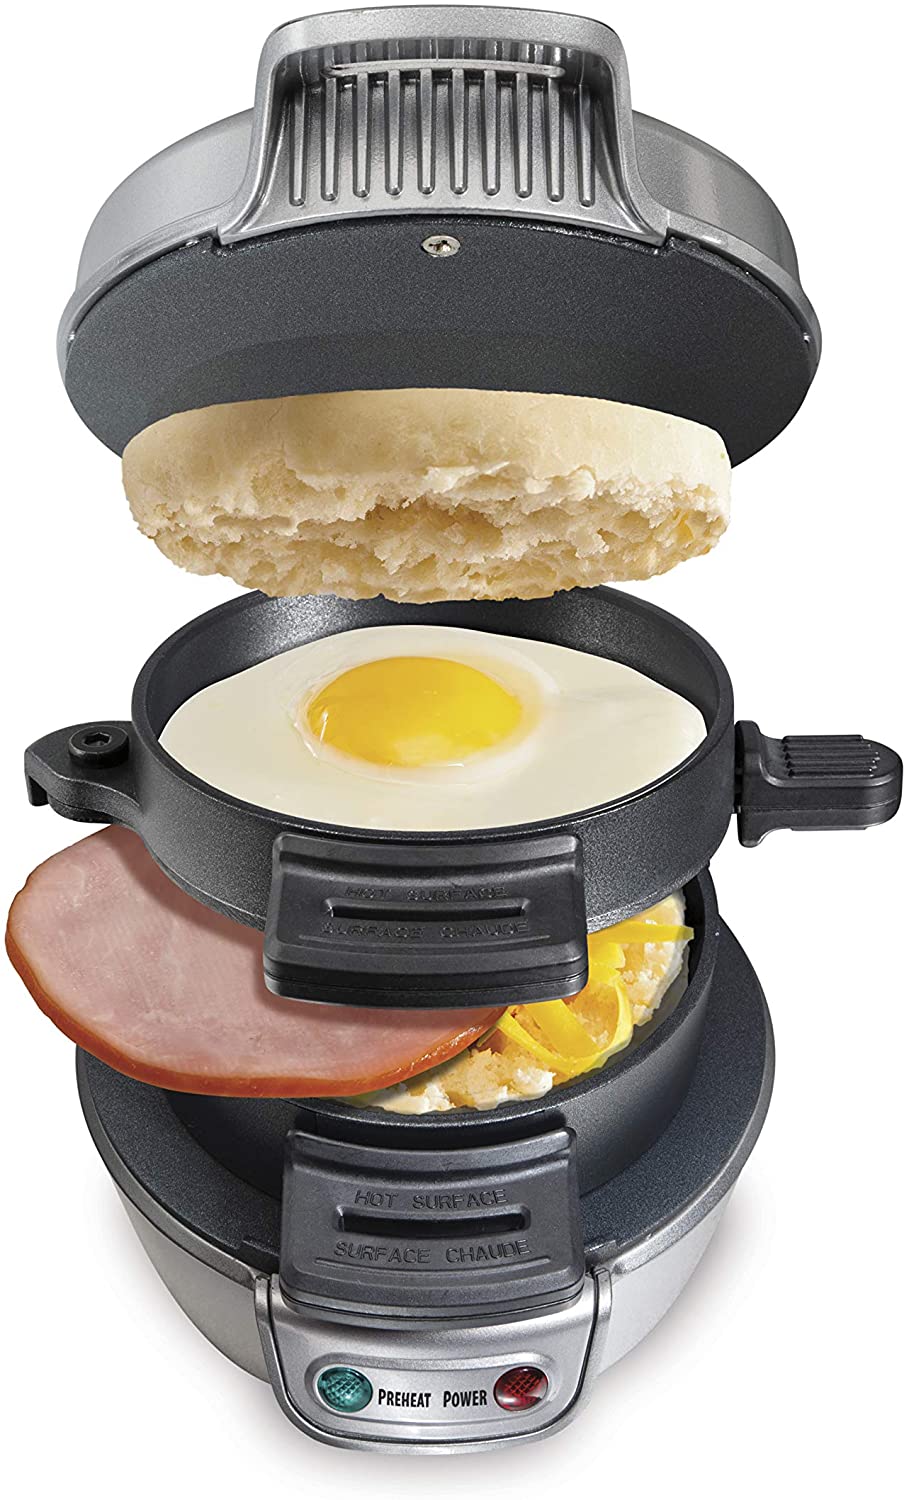 5 must-have kitchen gadgets for lazy cooks - Food24